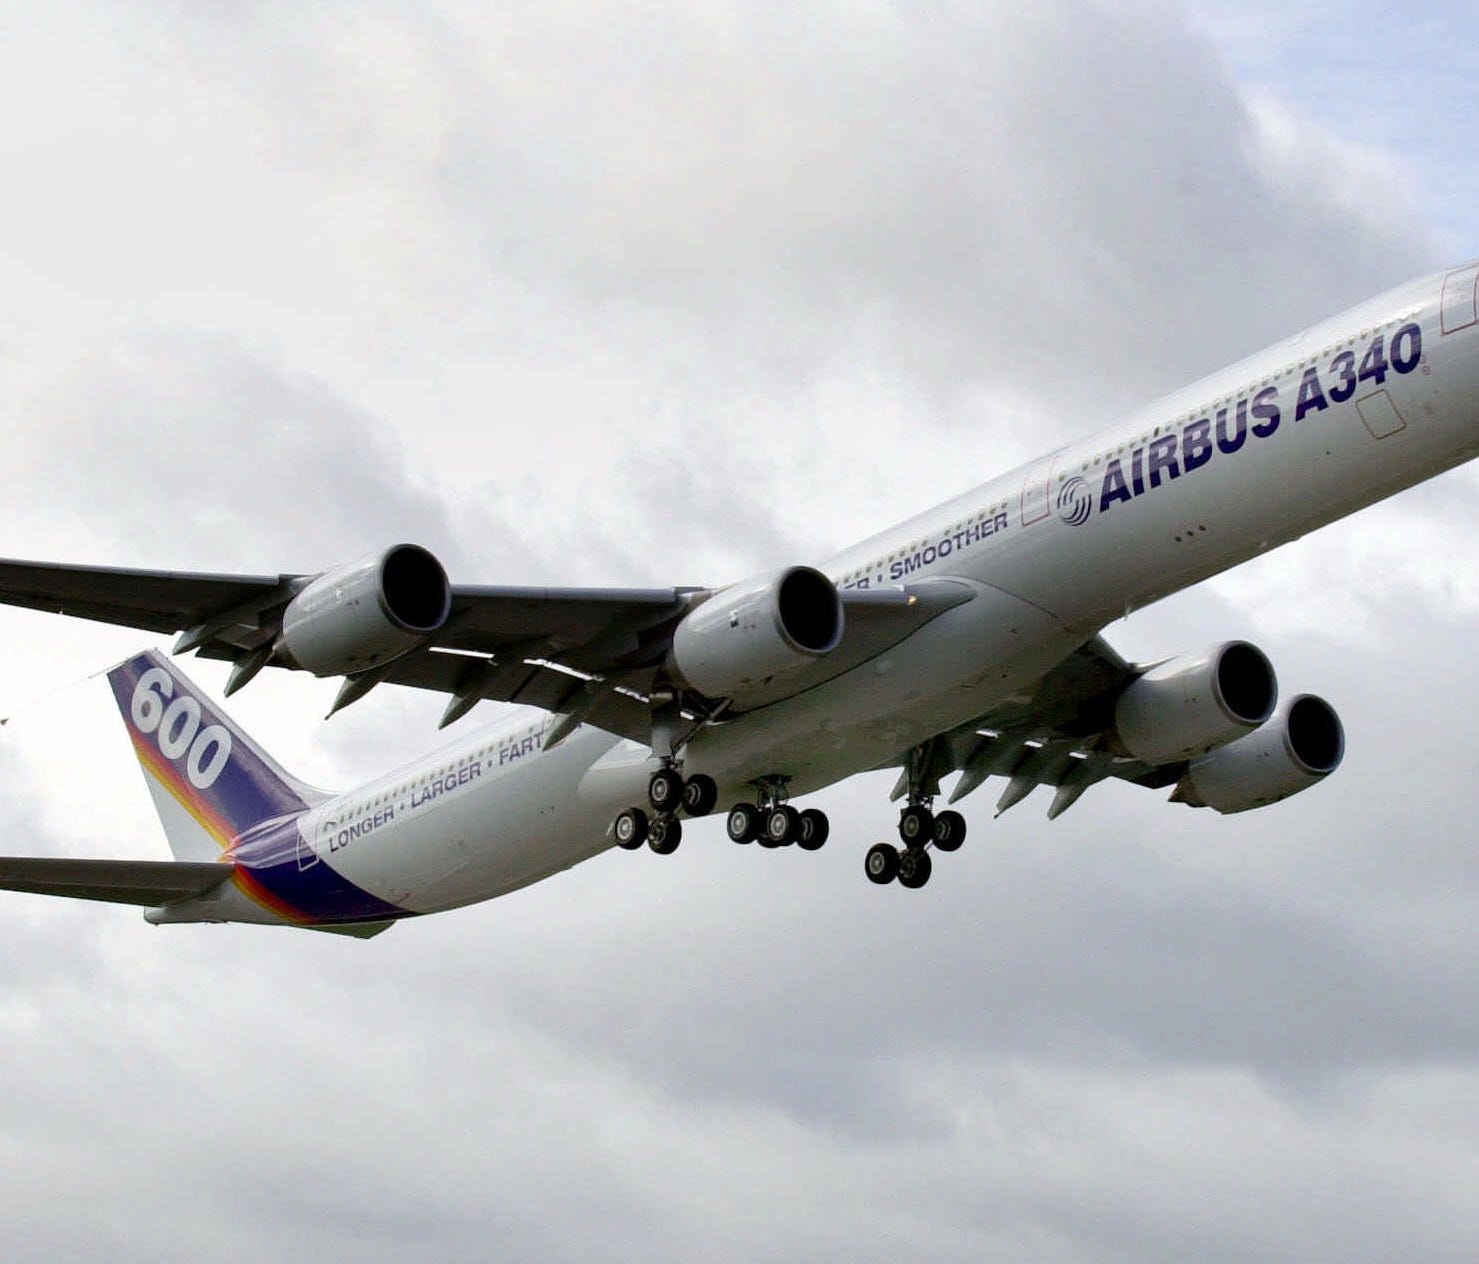 Some airplanes, like the A340-600, have cameras onboard that can help pilots visually determine damage.